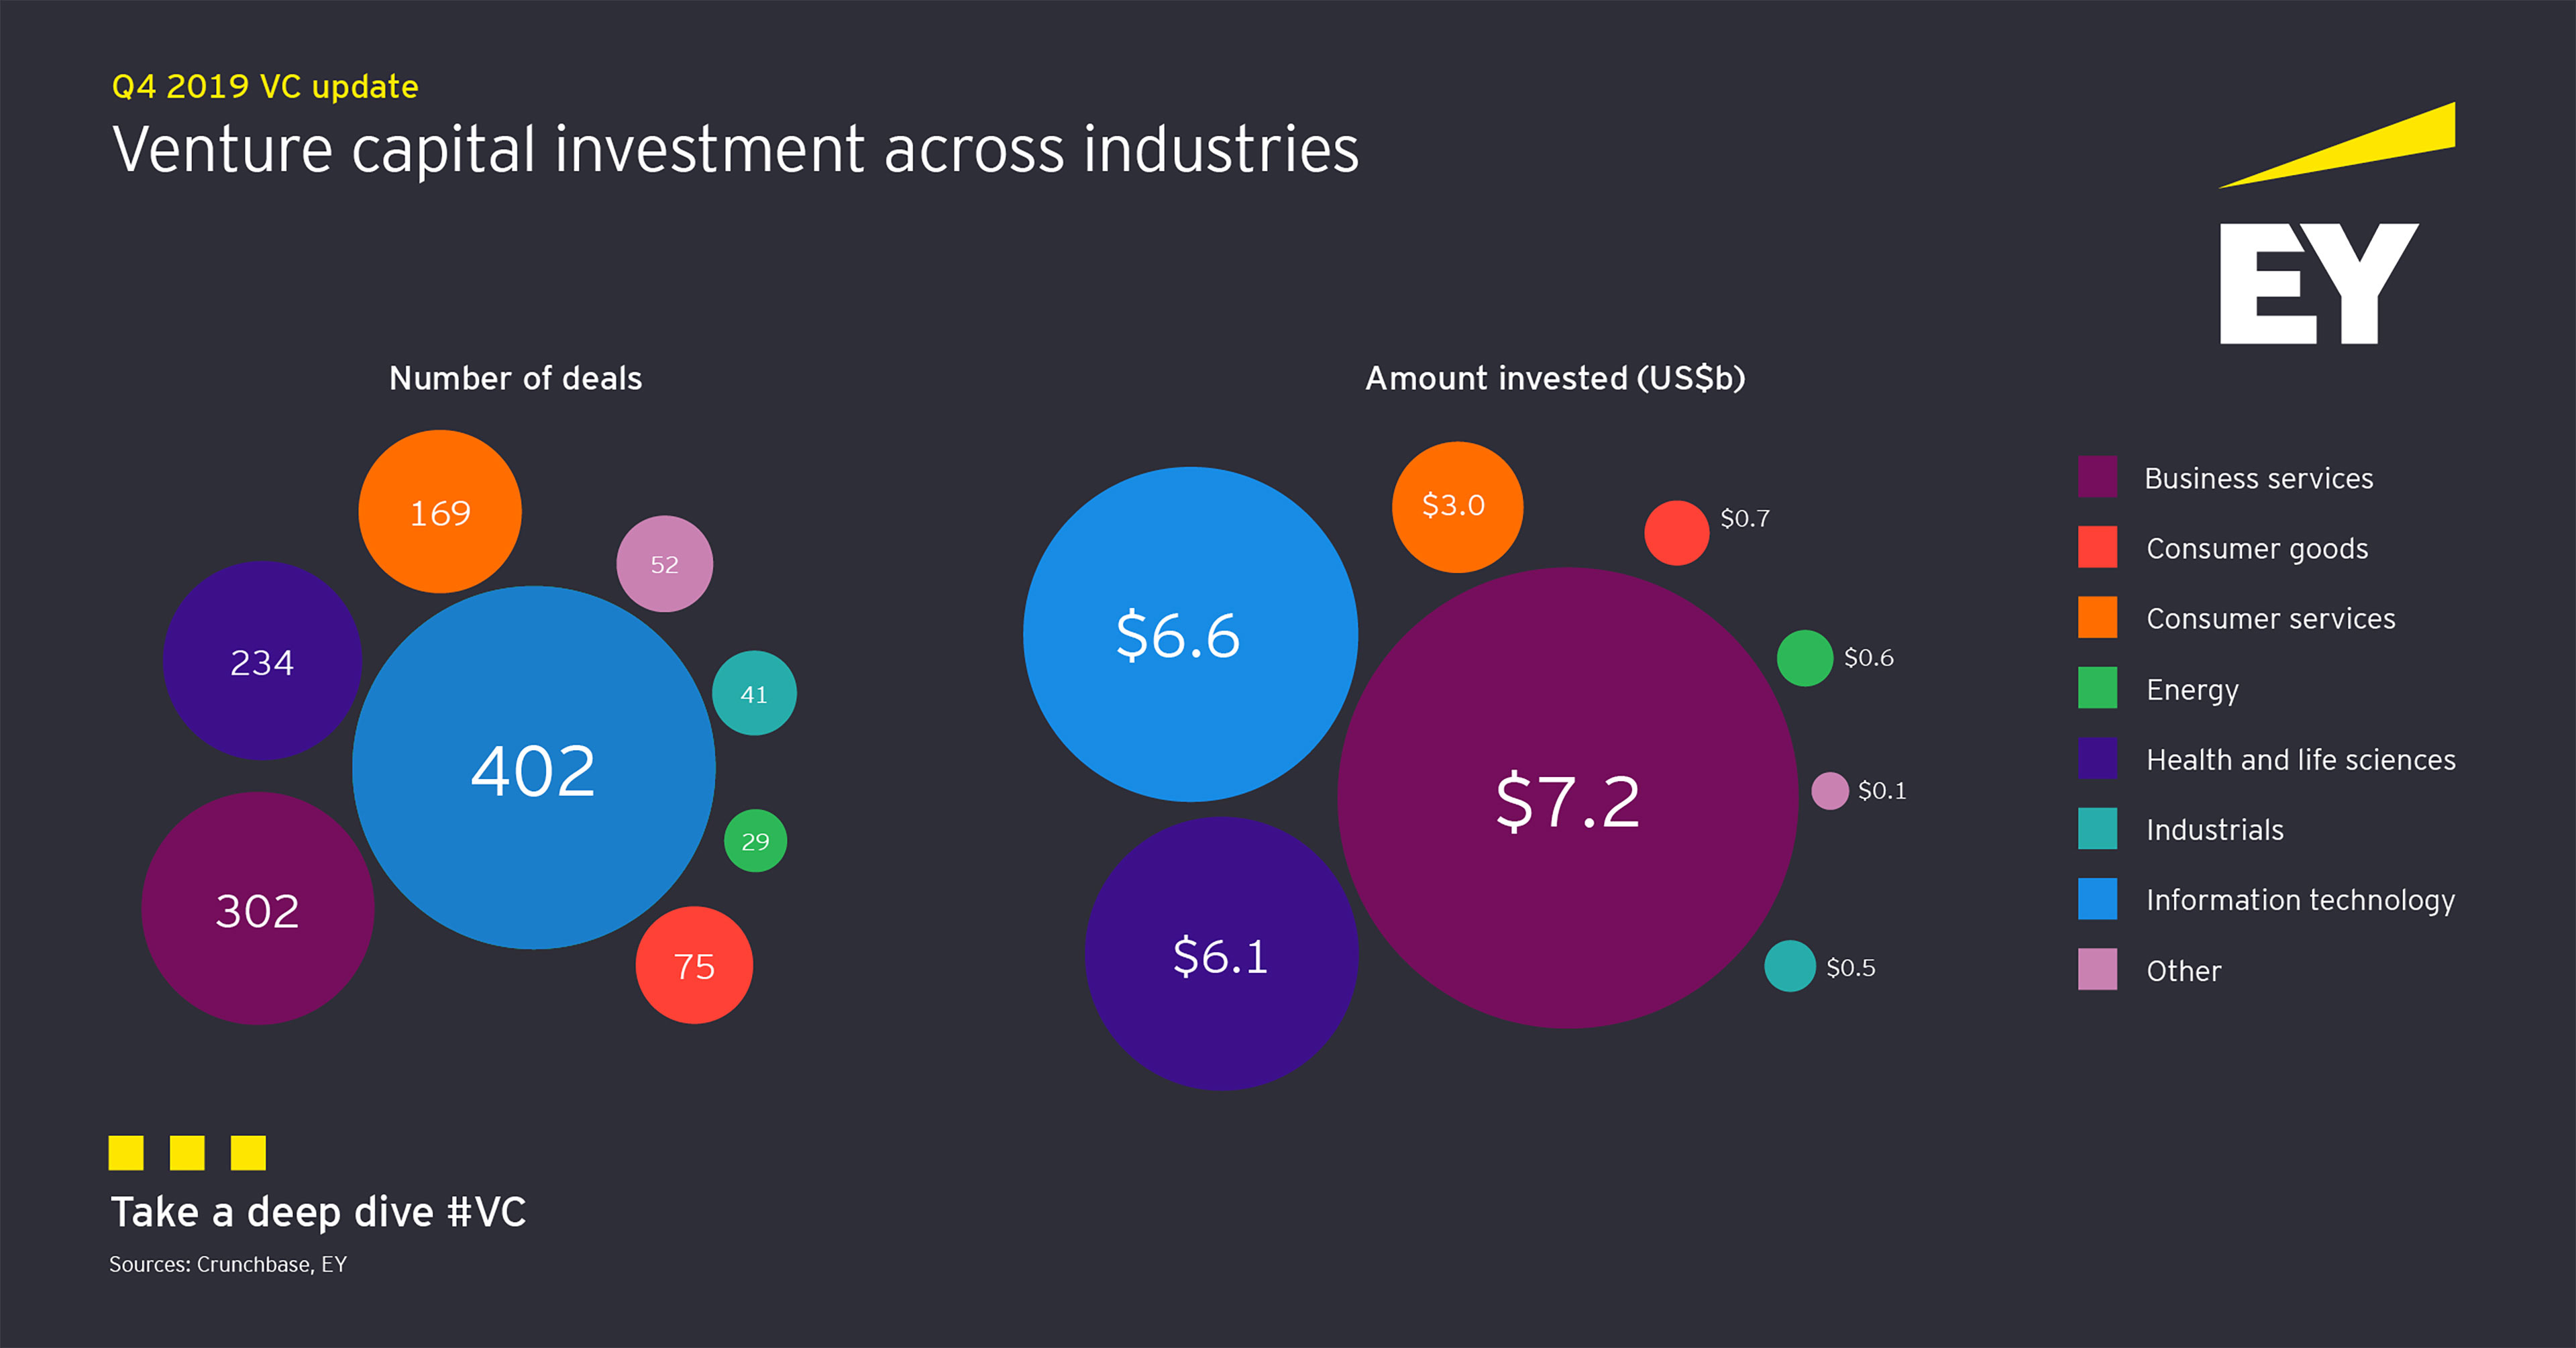 ey-venture-capital-investment-across-industries